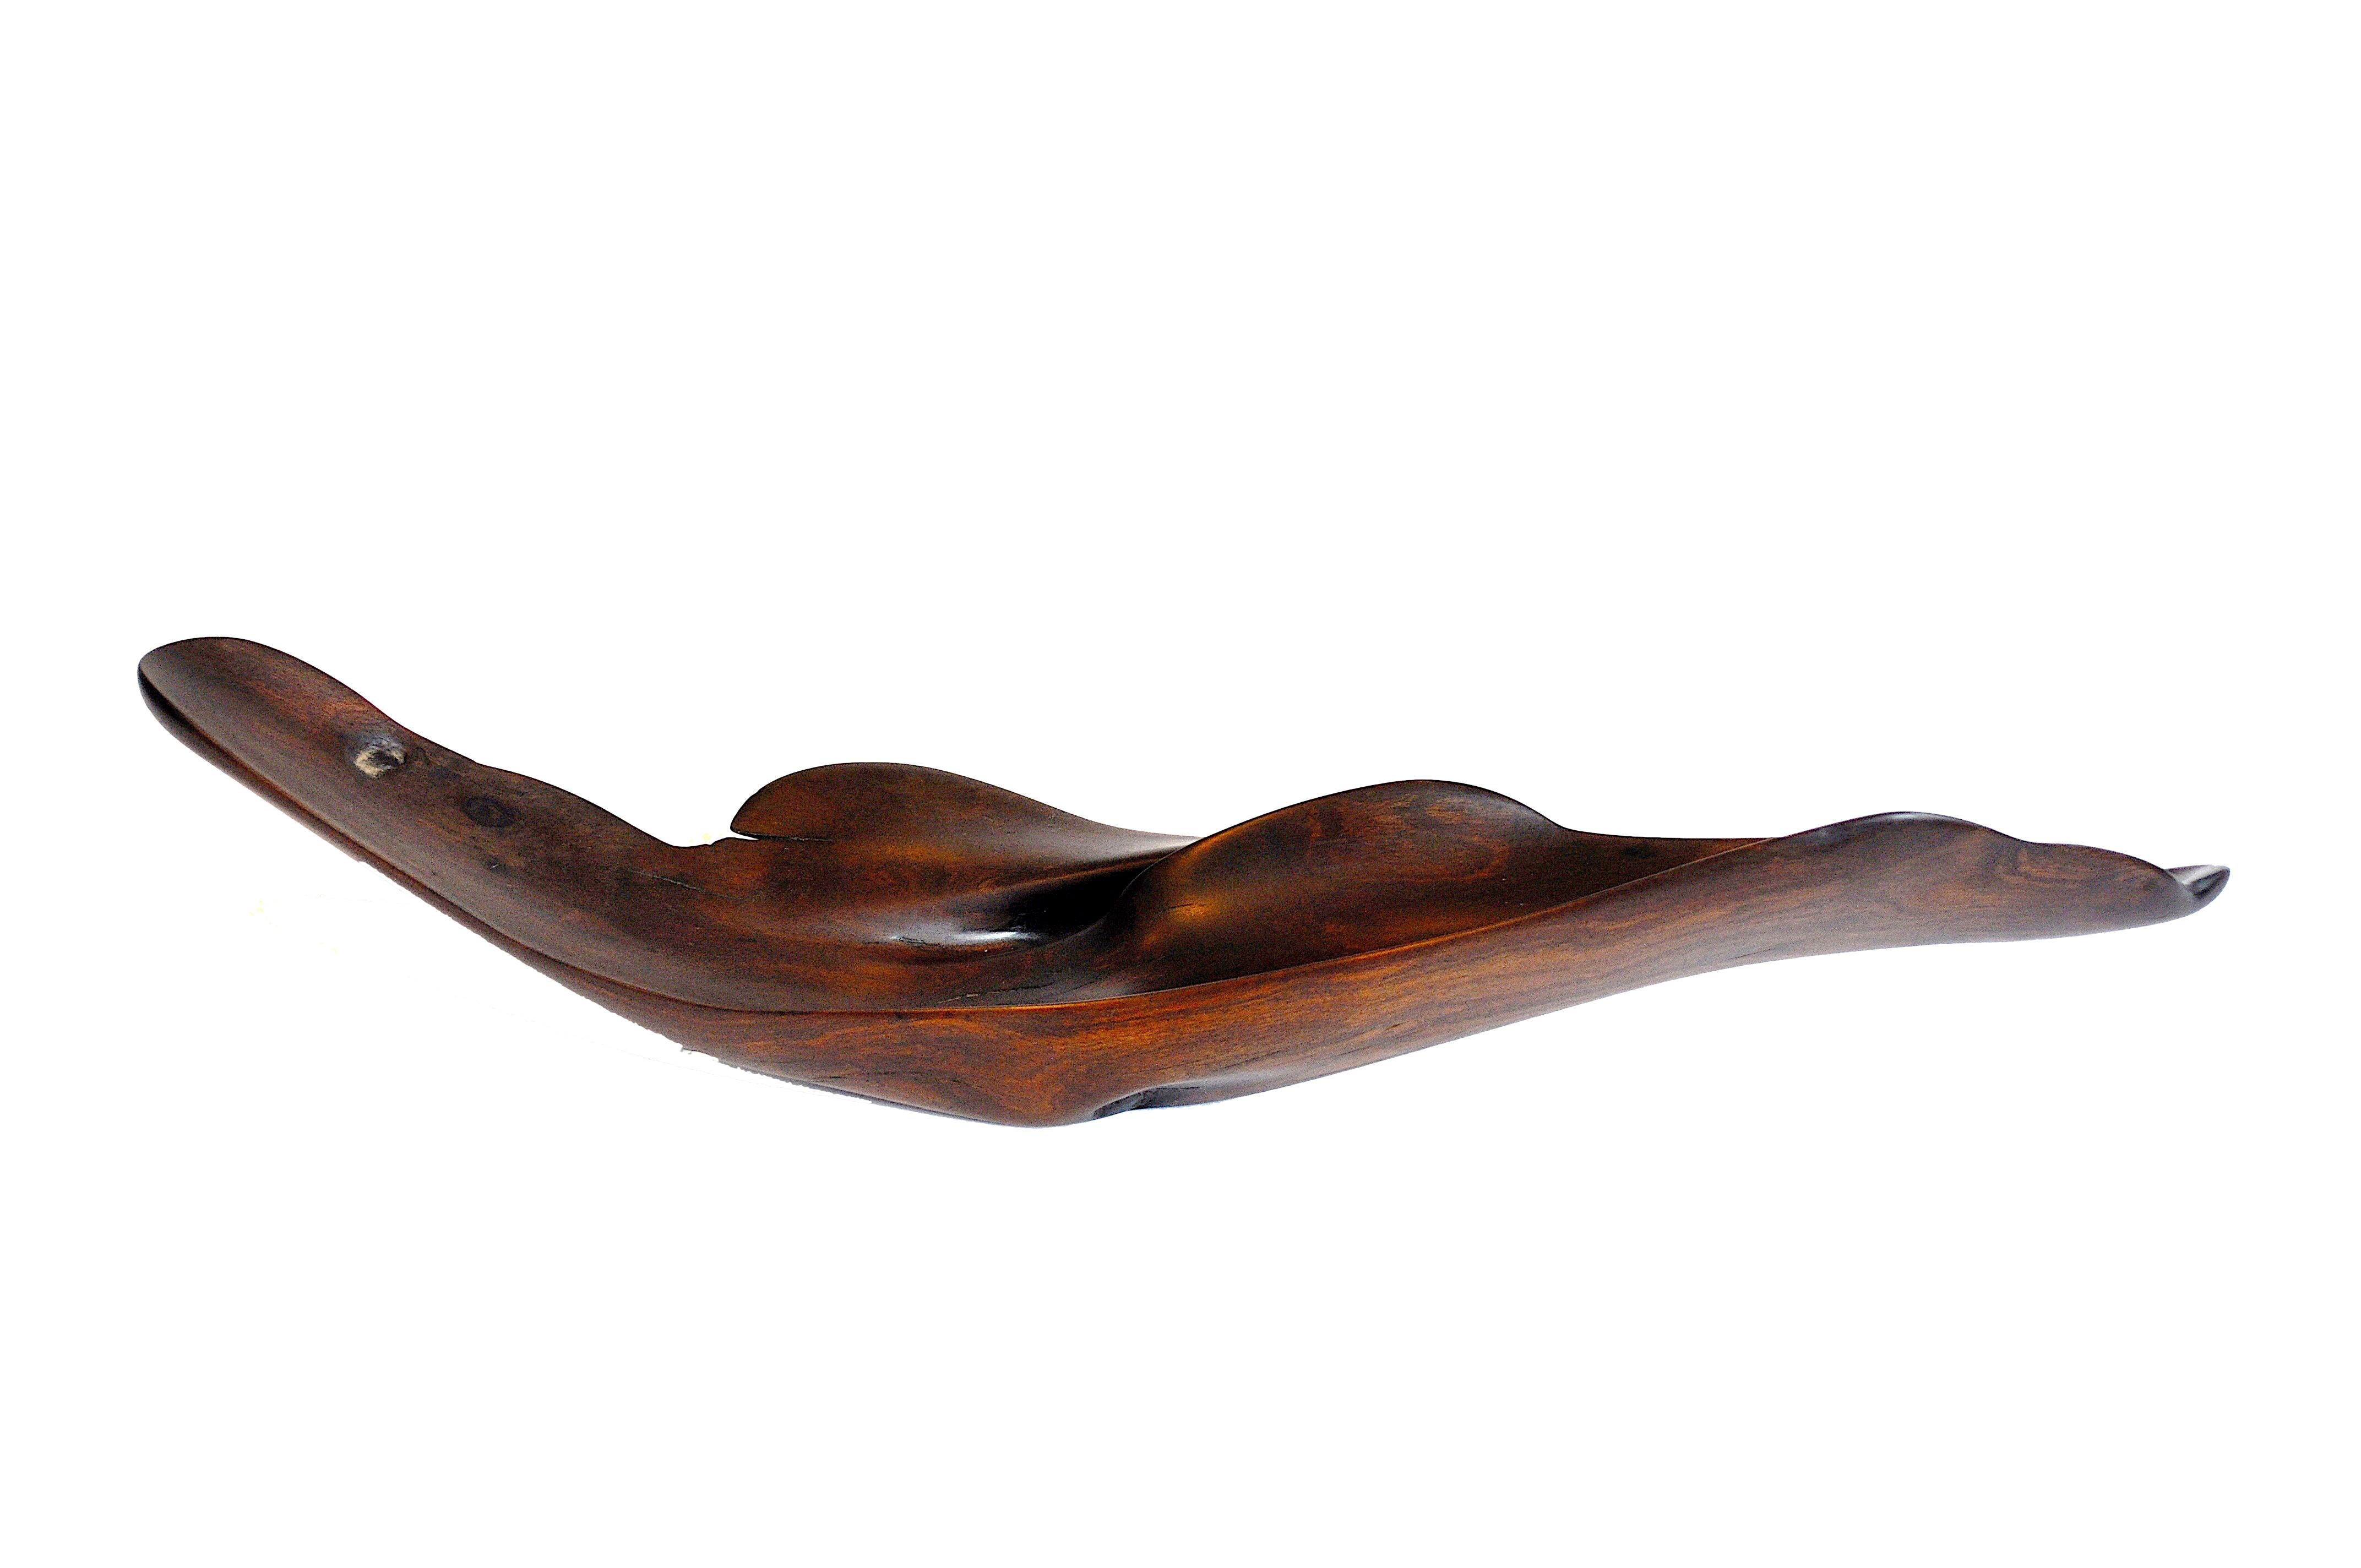 Tropical driftwood vessel 1082 by Jörg Pietschmann
Dimensions: D 12 x W 53 x H 11.5 cm 
Materials: Tropical Driftwood
Finish: Polished oil finish.


In Pietschmann’s sculptures, trees that for centuries were part of a landscape and founded in